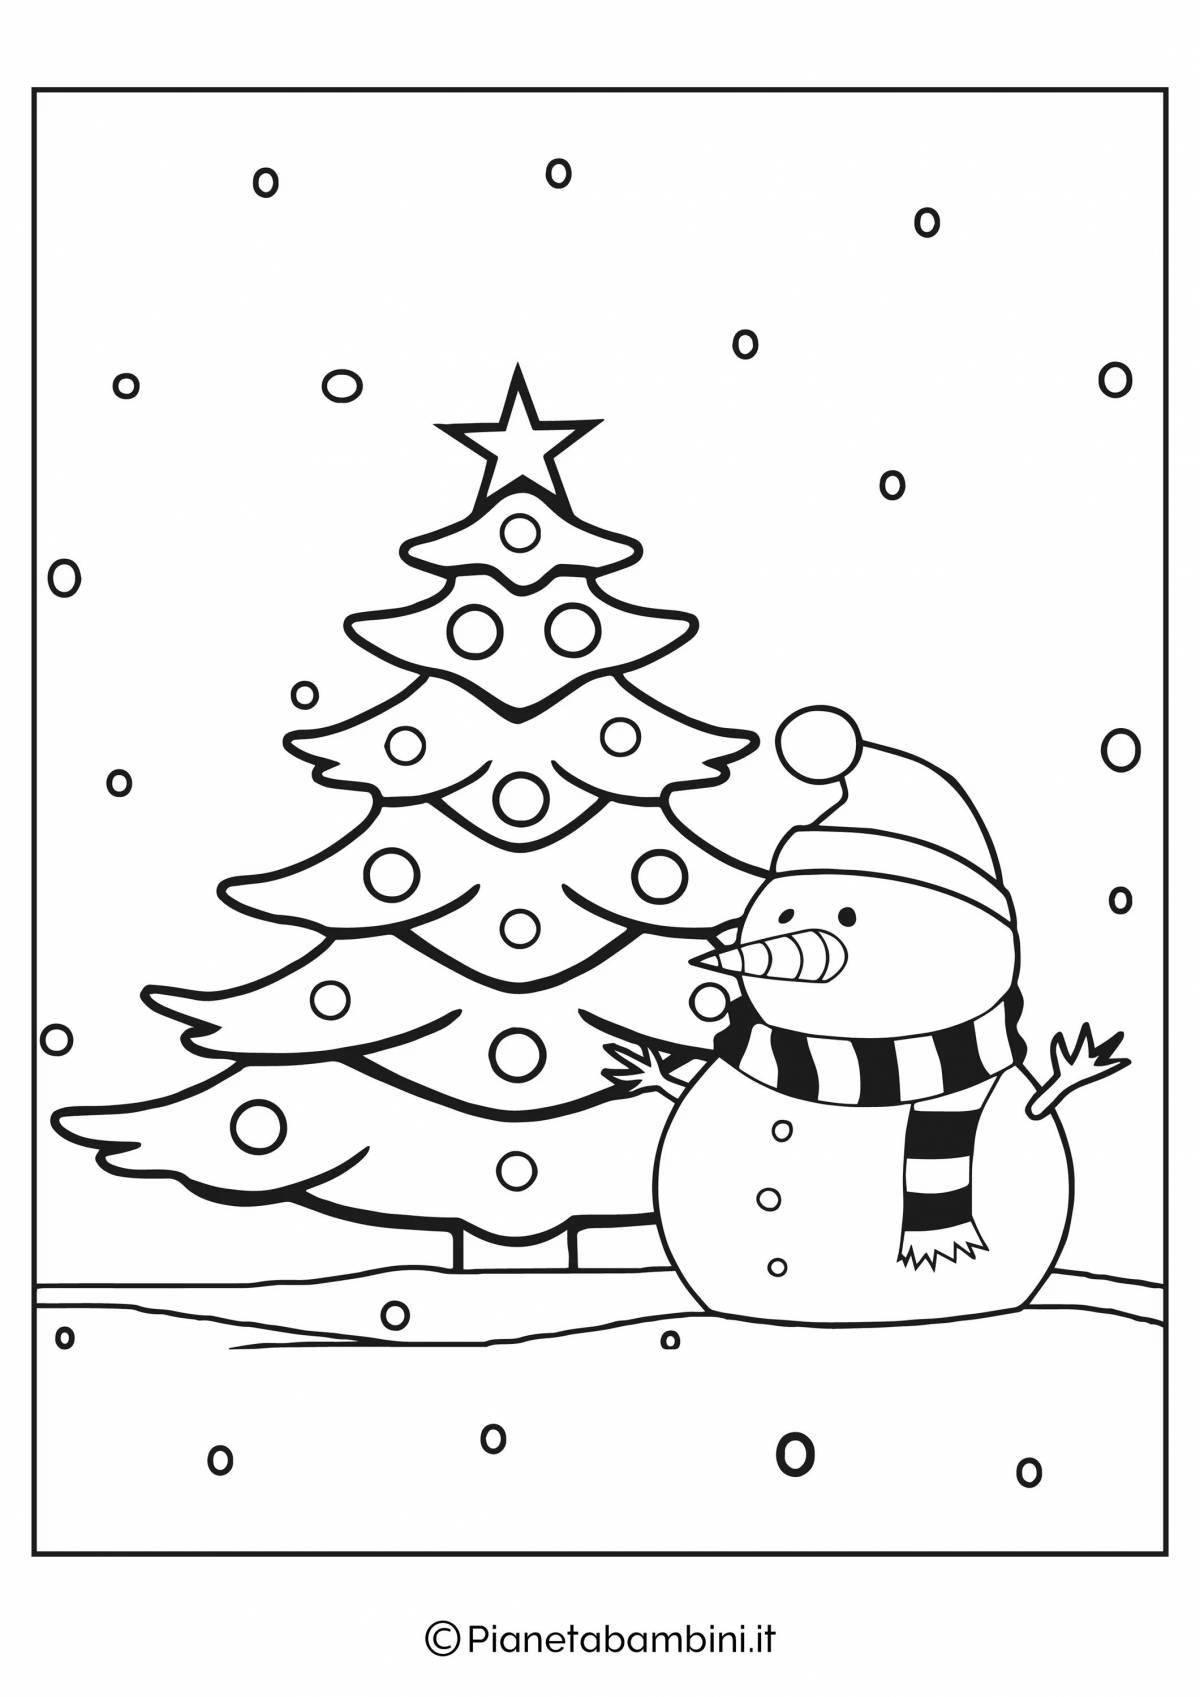 Adorable Christmas tree coloring book for kids